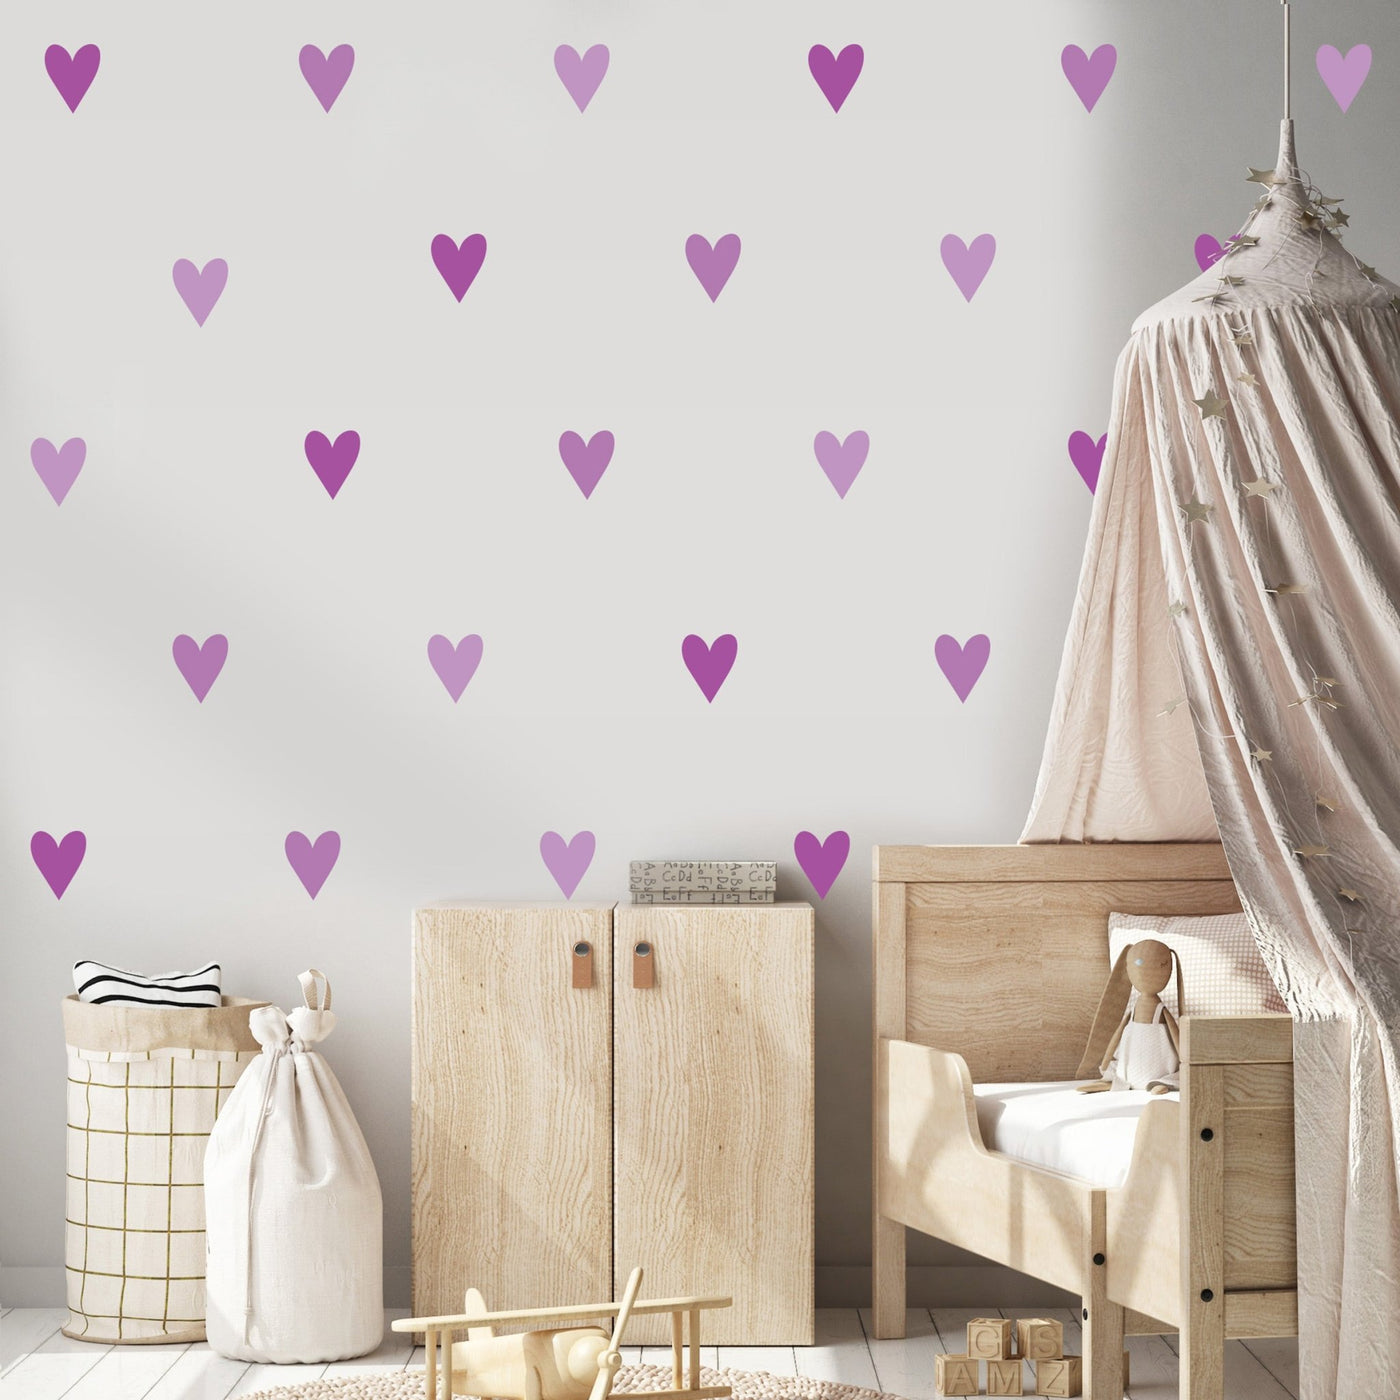 Purple Heart Wall Stickers - Jack Harry and Ollie